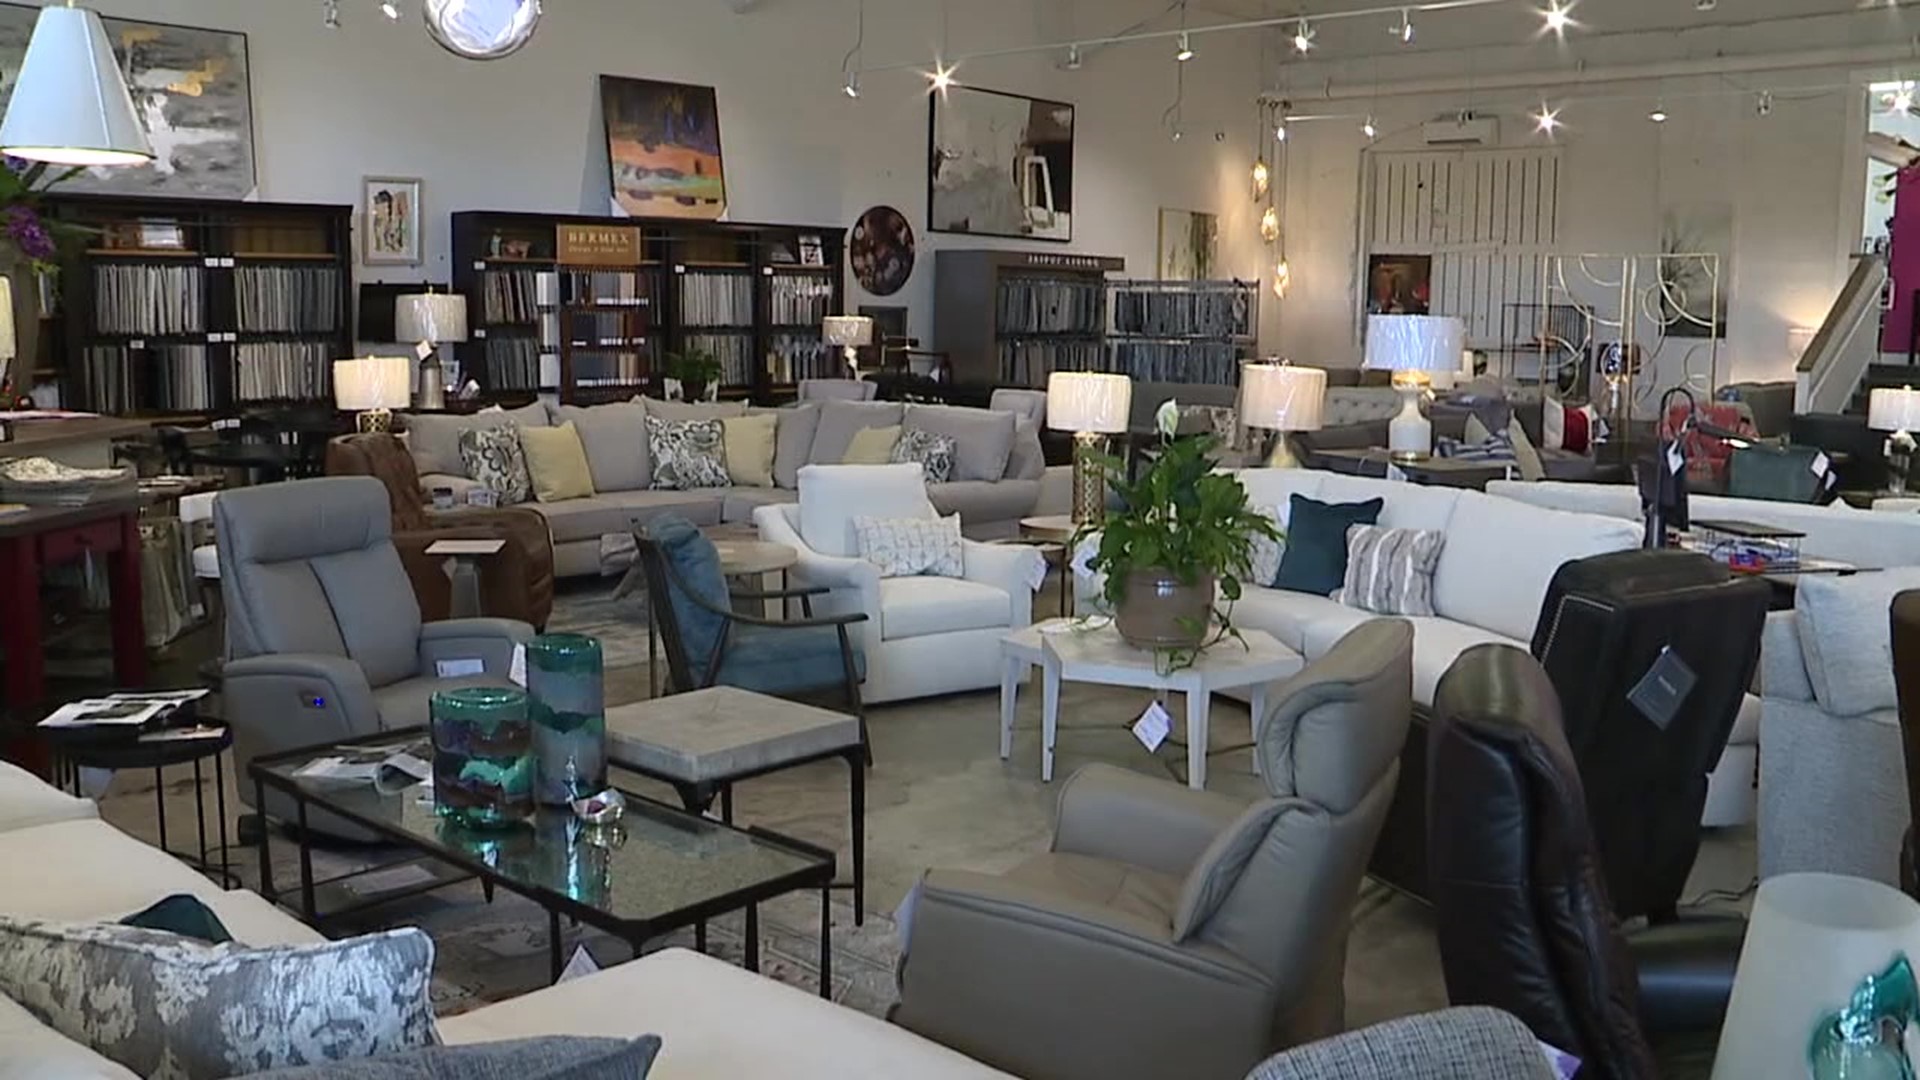 Furniture stores like Kurlancheek's are filled up on supplies after facing delays in the pandemic.